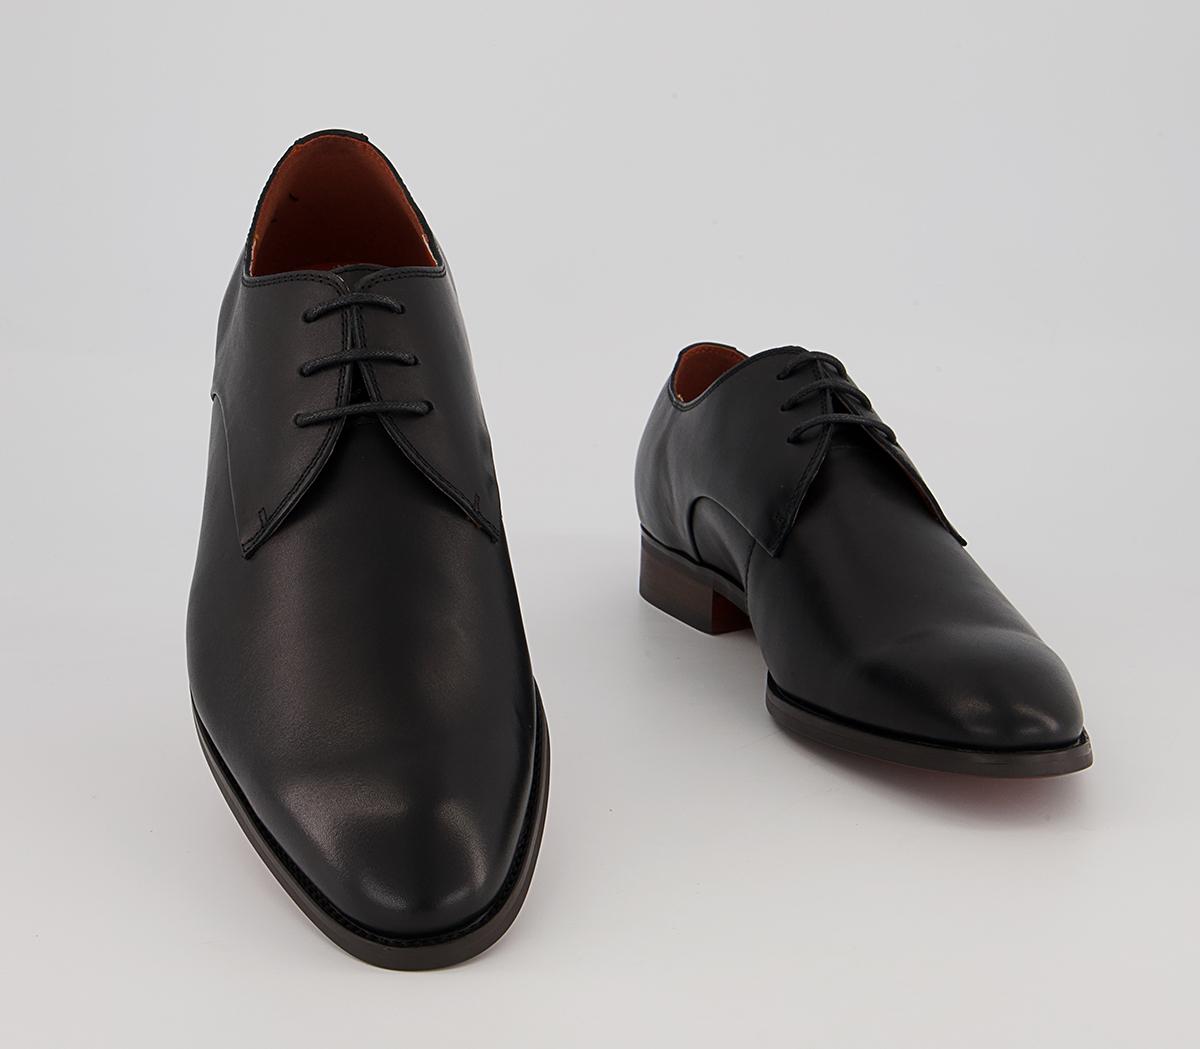 OFFICE Miguel Three Eye Derby Shoes Black Leather - Men’s Smart Shoes